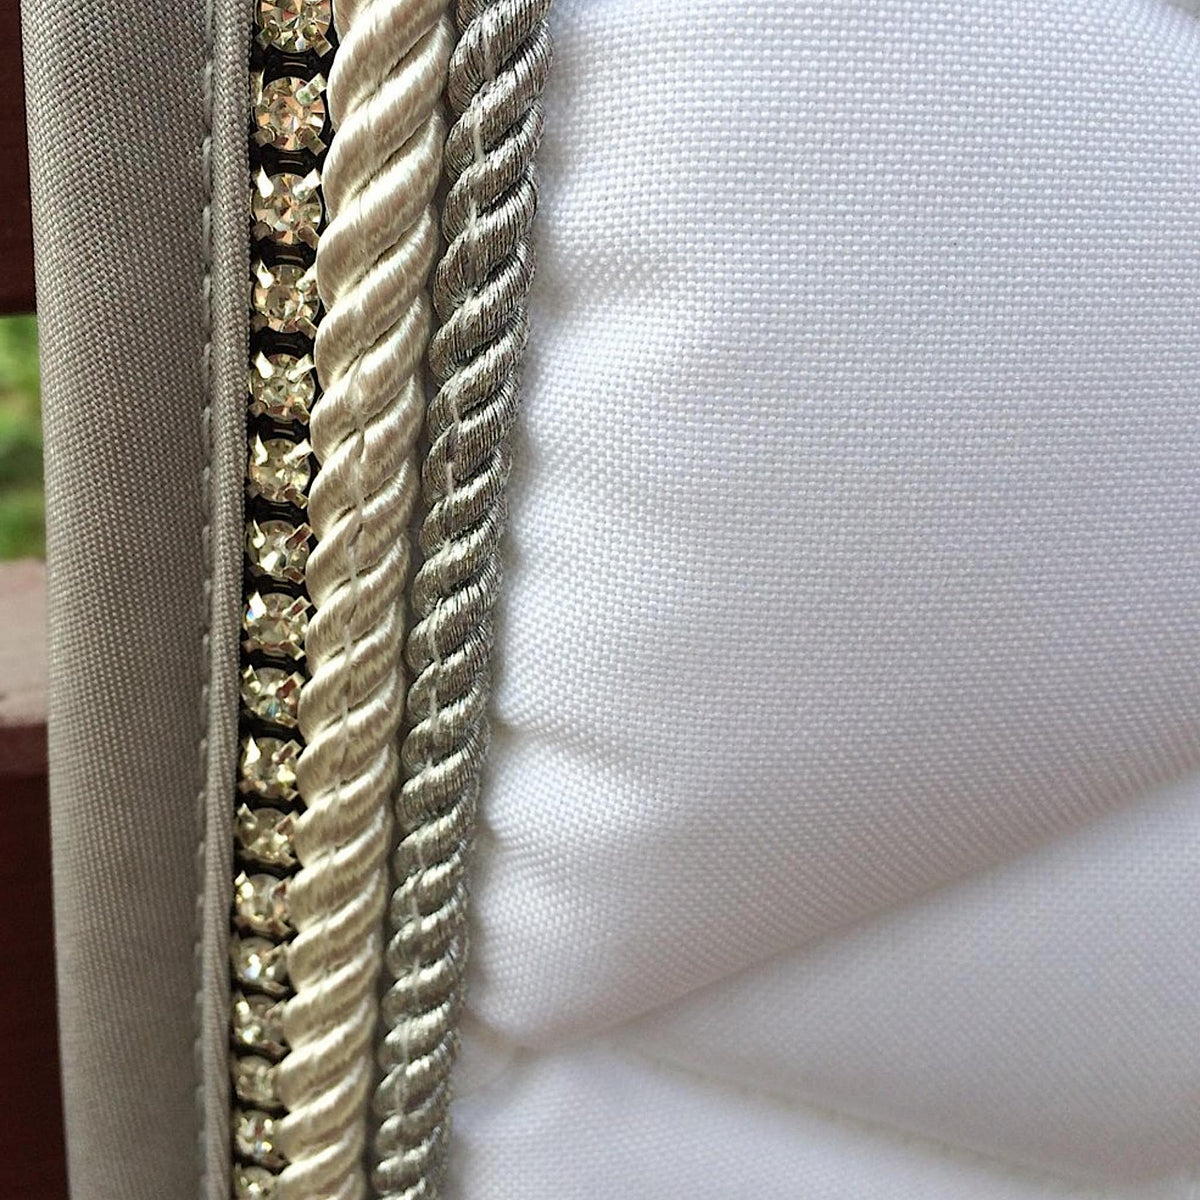 Saddle pad trim; clear diamantes with gold and silver braids, grey edges.